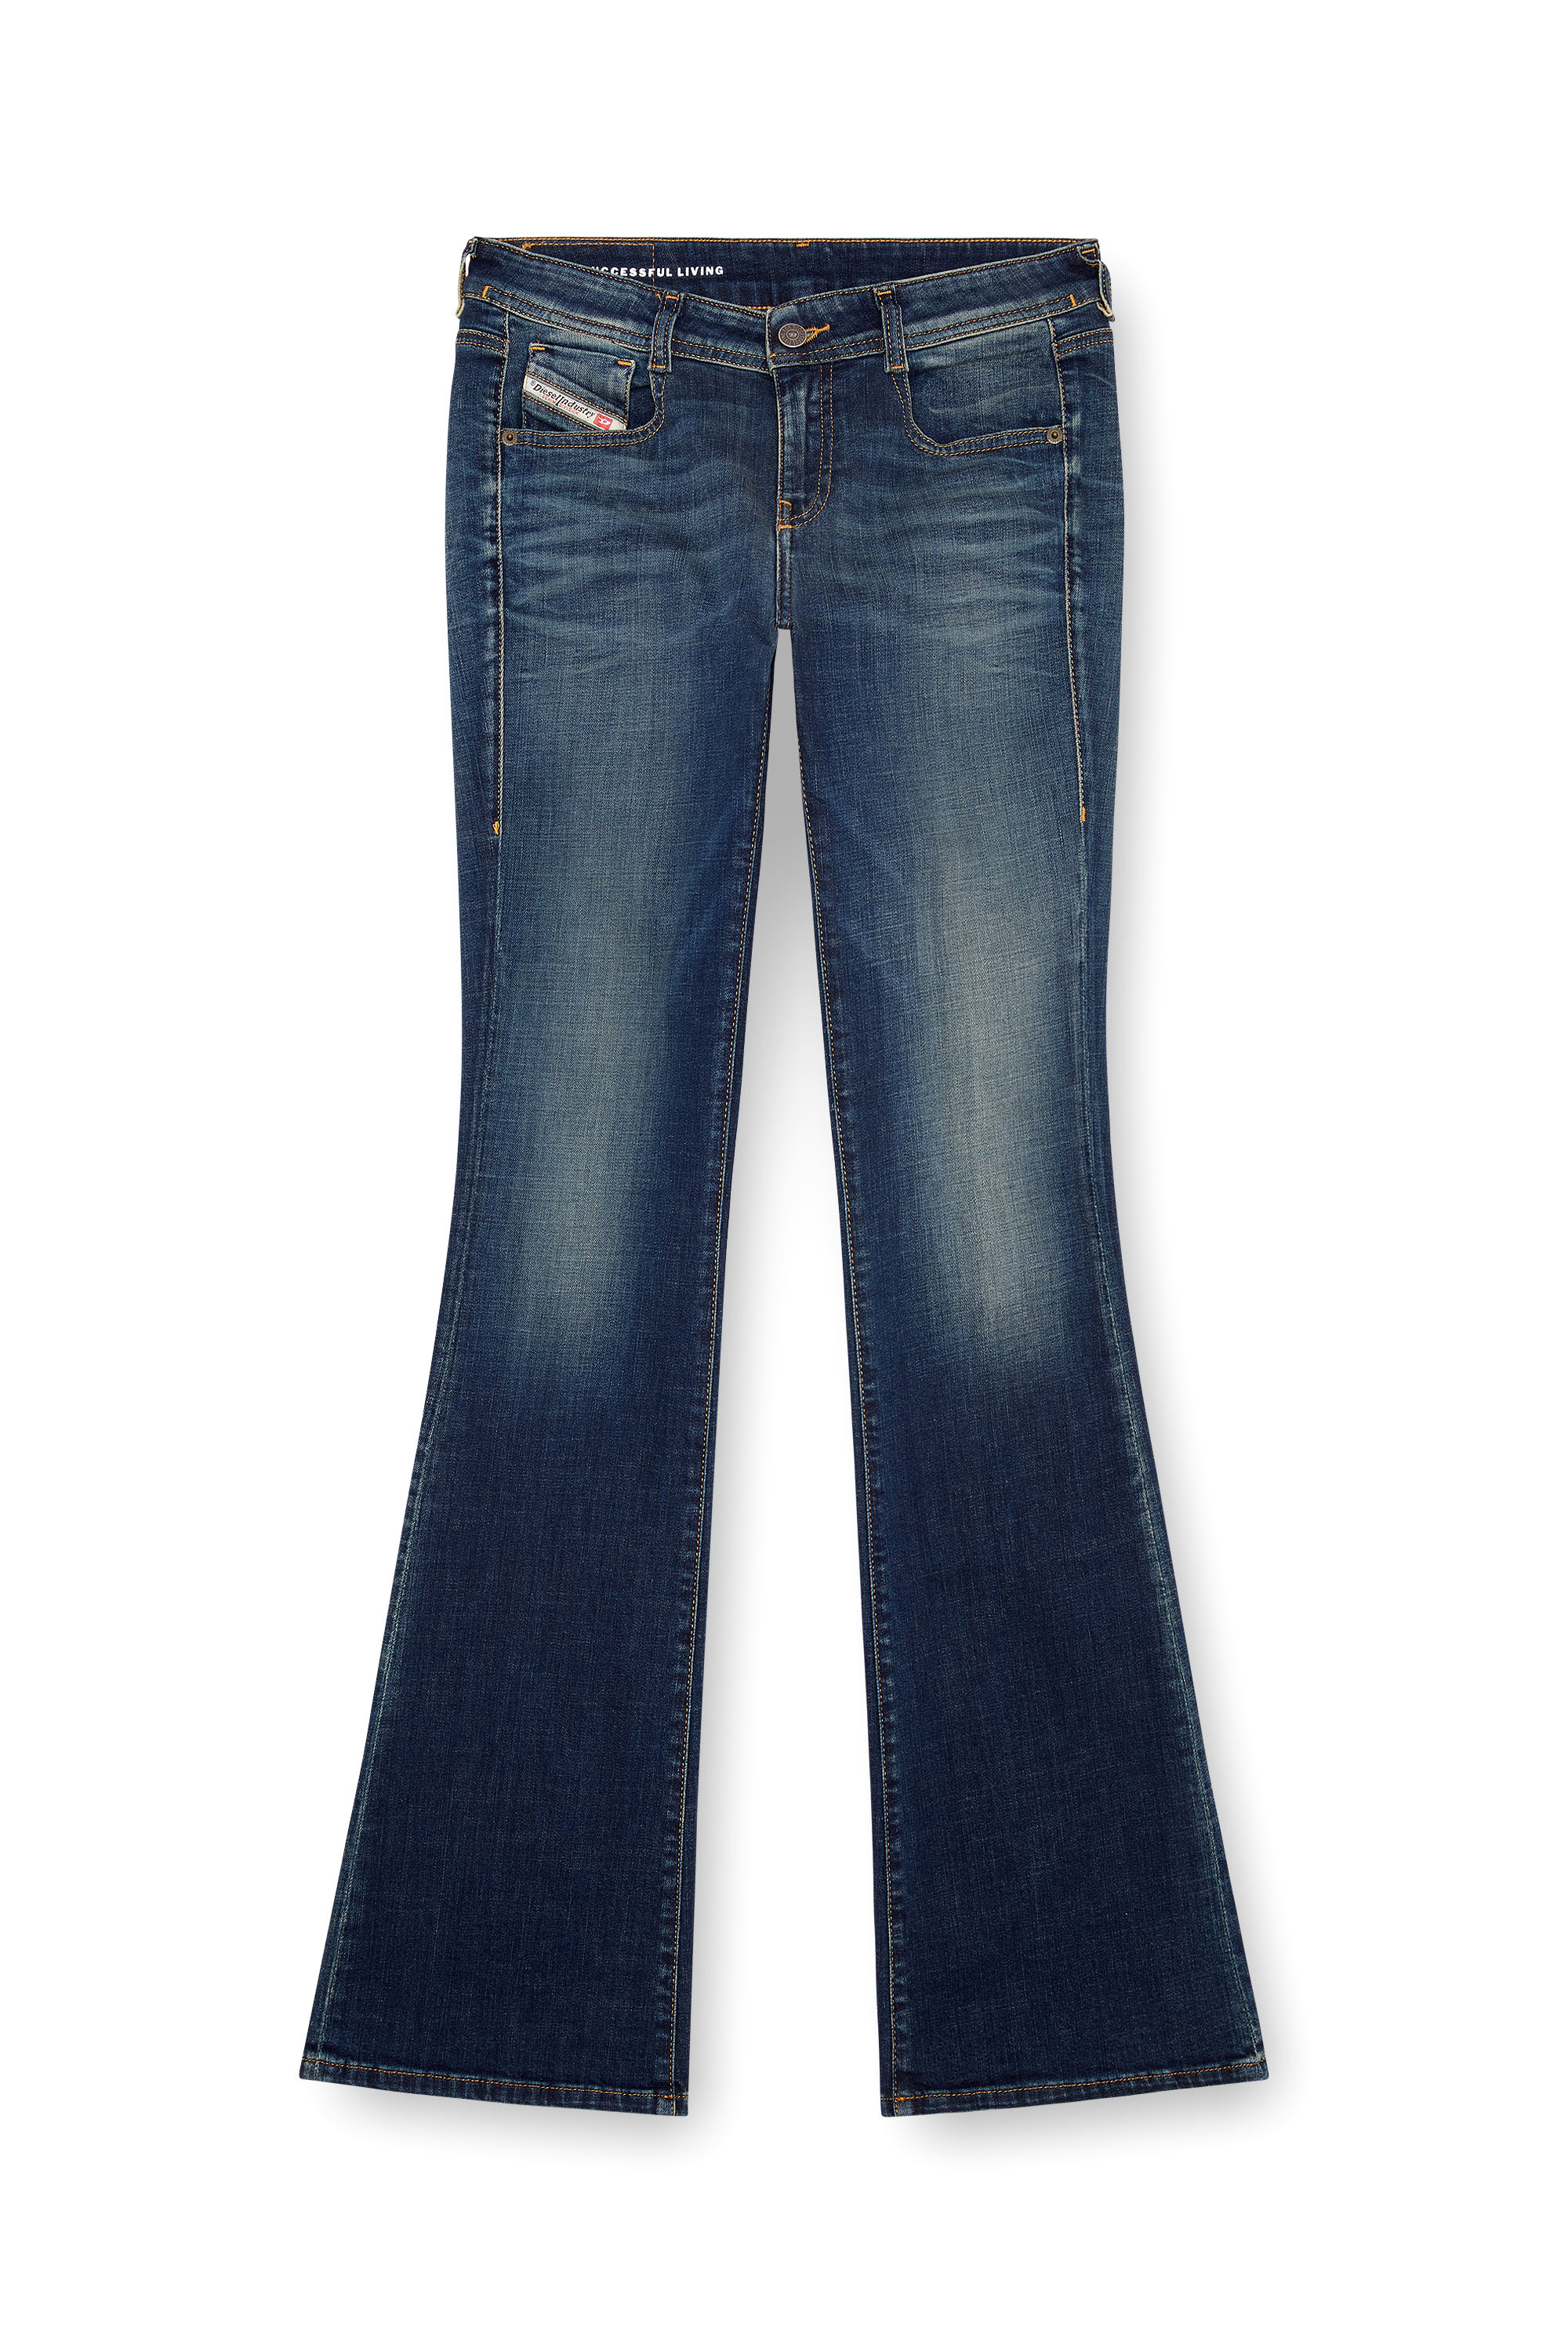 Diesel - Bootcut and Flare Jeans 1969 D-Ebbey 09J20, Mujer Bootcut y Flare Jeans - 1969 D-Ebbey in Azul marino - Image 3